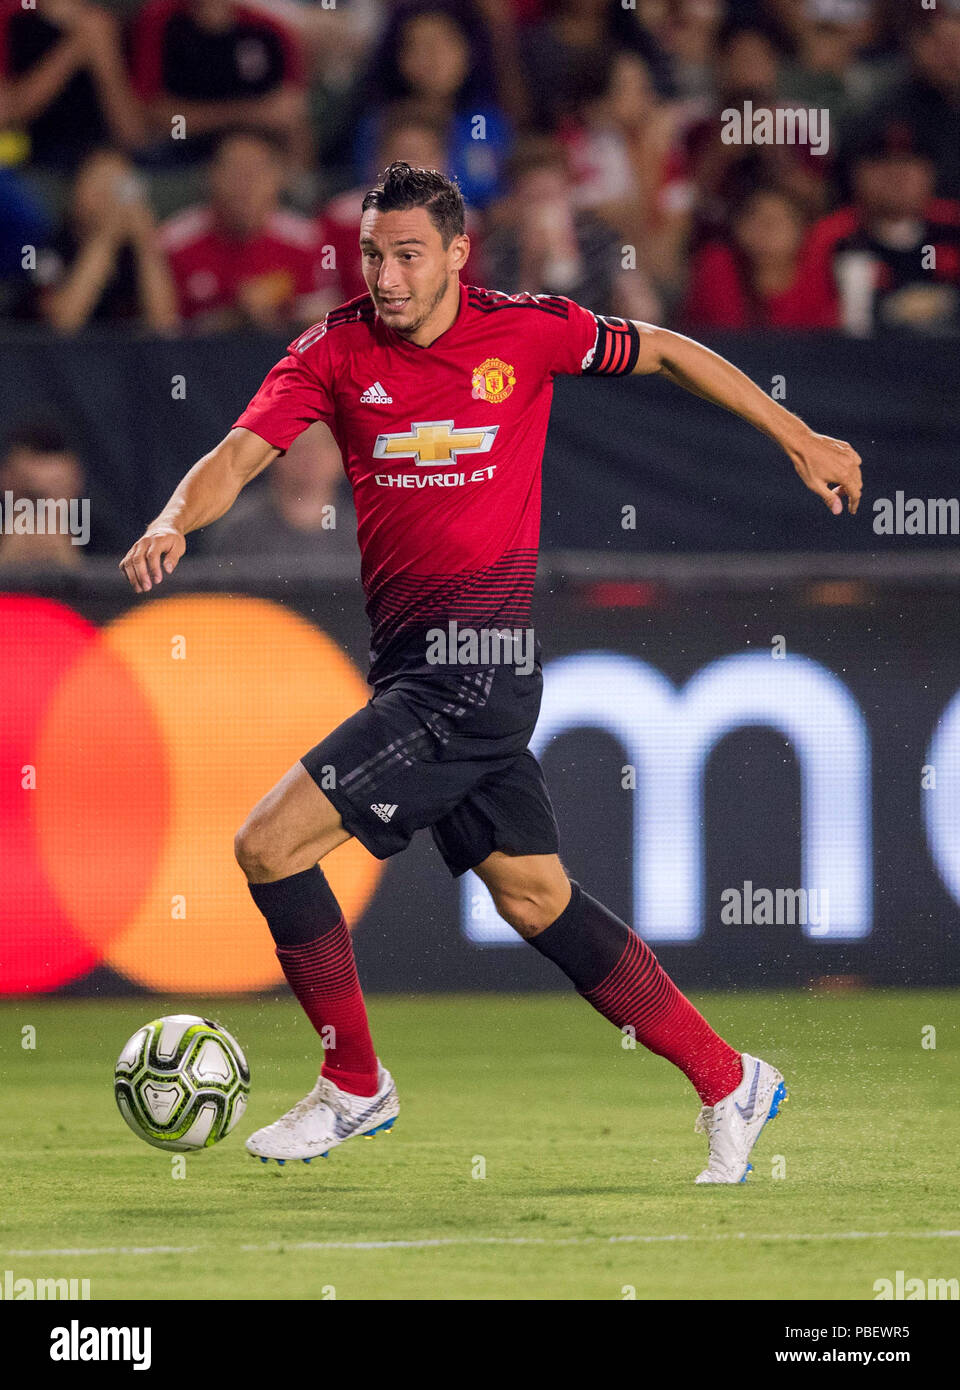 Carson, CA. 25th July, 2018. Manchester United defender Darmian (36) dribbles the ball during a game between AC Milan vs Manchester on Wednesday, July 25, 2018 at the Center,